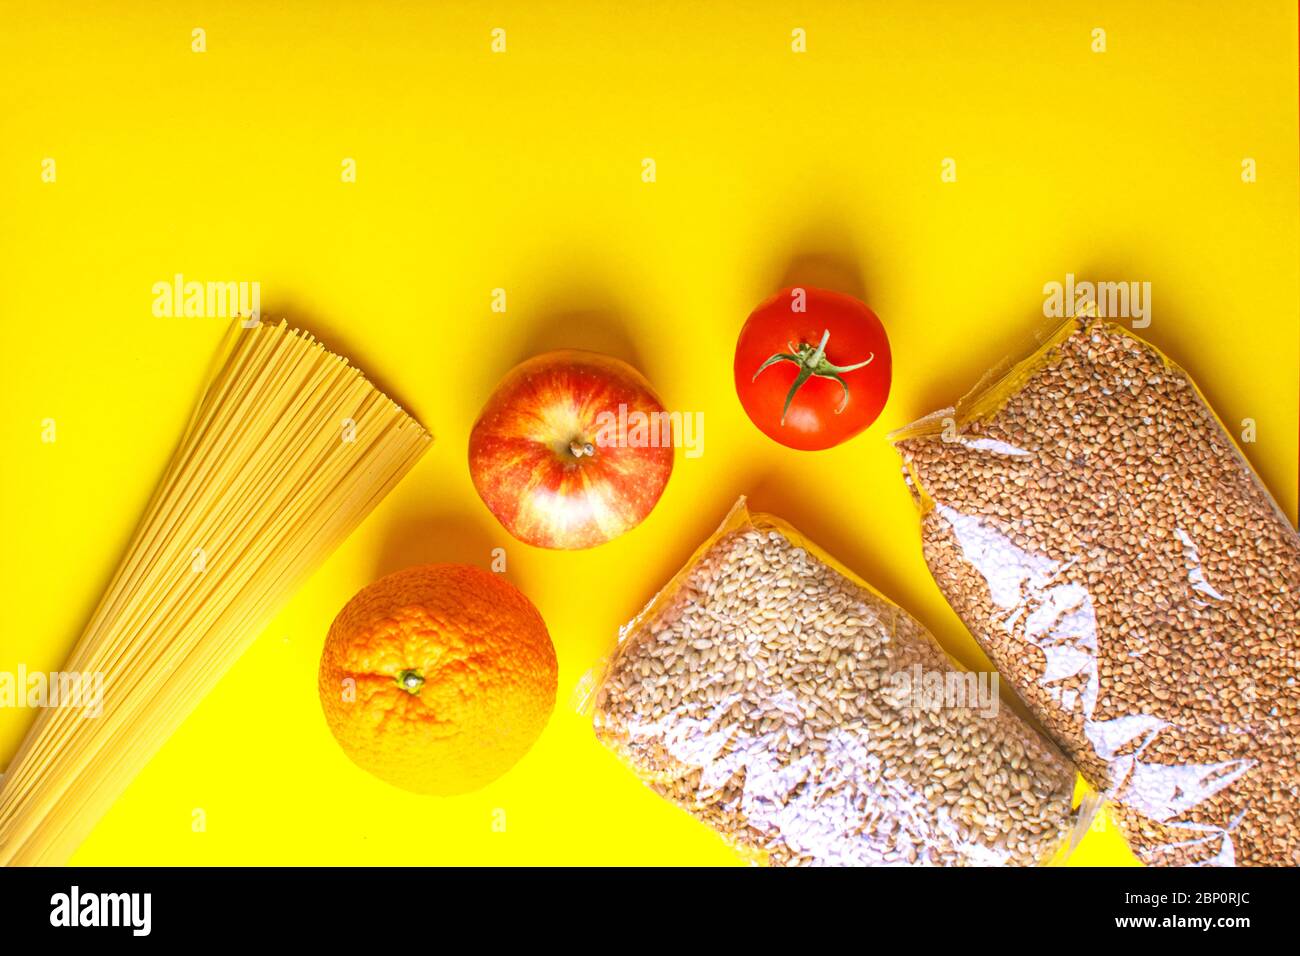 Food supplies for quarantine on yellow background. Pasta, vegetables, fruits, cereals. Stock Photo